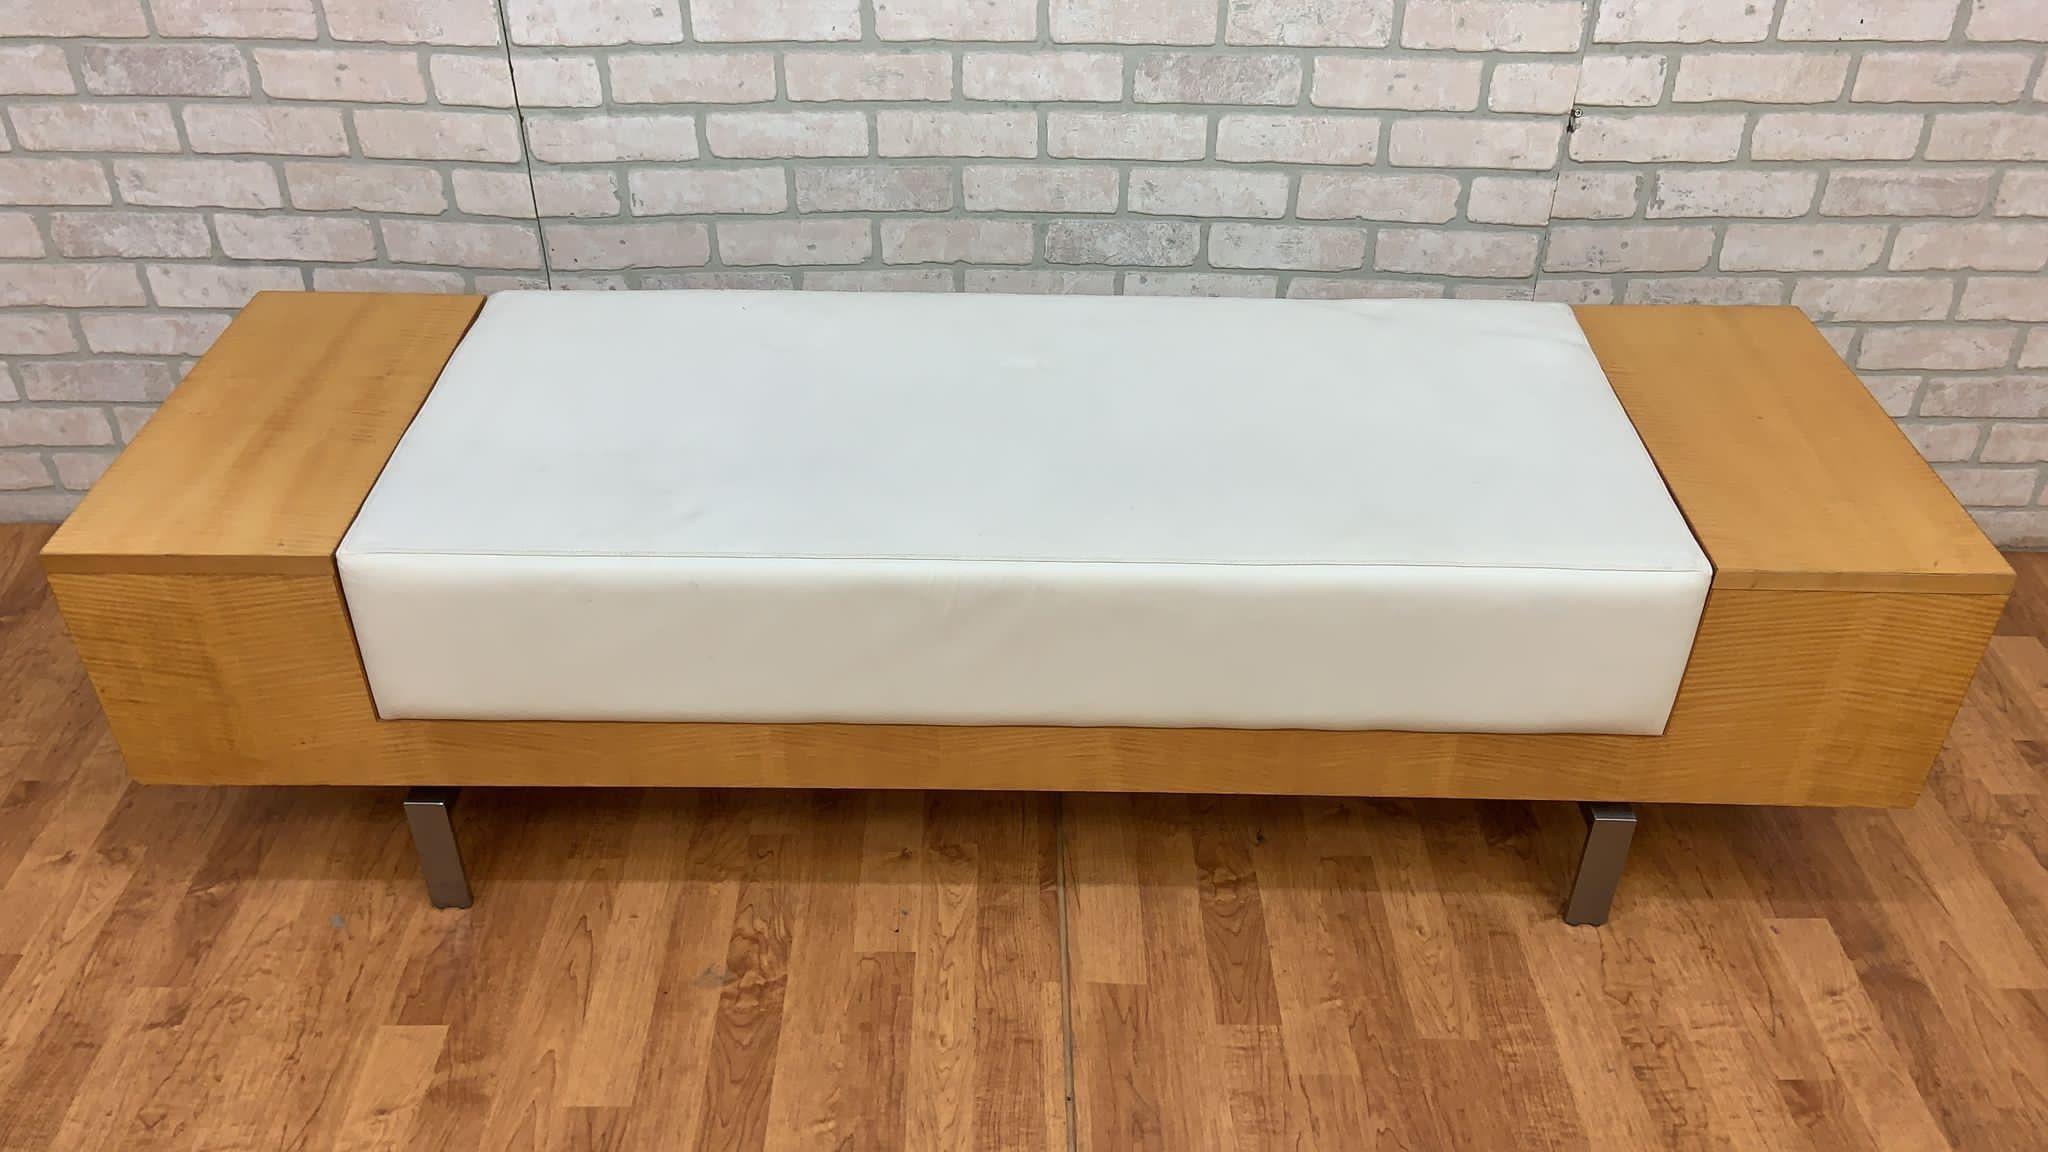 Vintage Modern Birchwood and White Leather Commercial Bench

Circa: 1990’s

Dimensions:
H: 18